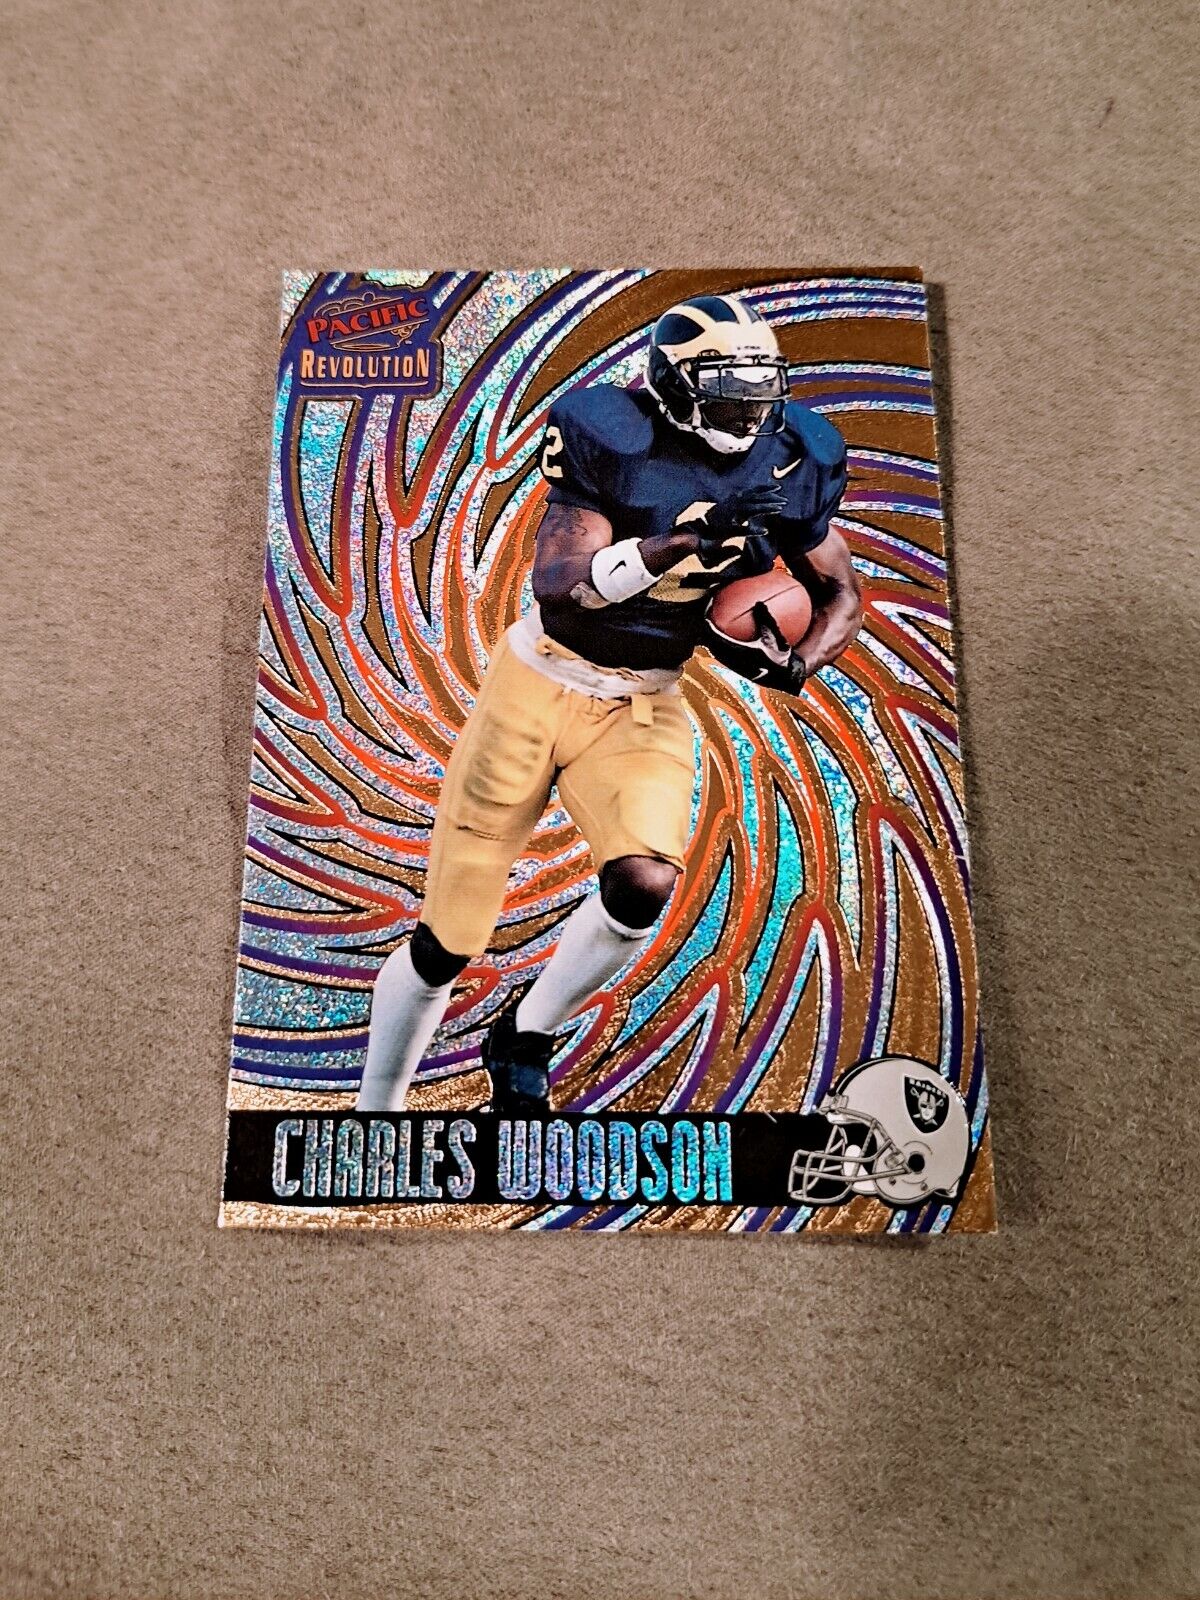 1998 CHARLES WOODSON  PACIFIC REVOLUTION ROOKIE CARD #105